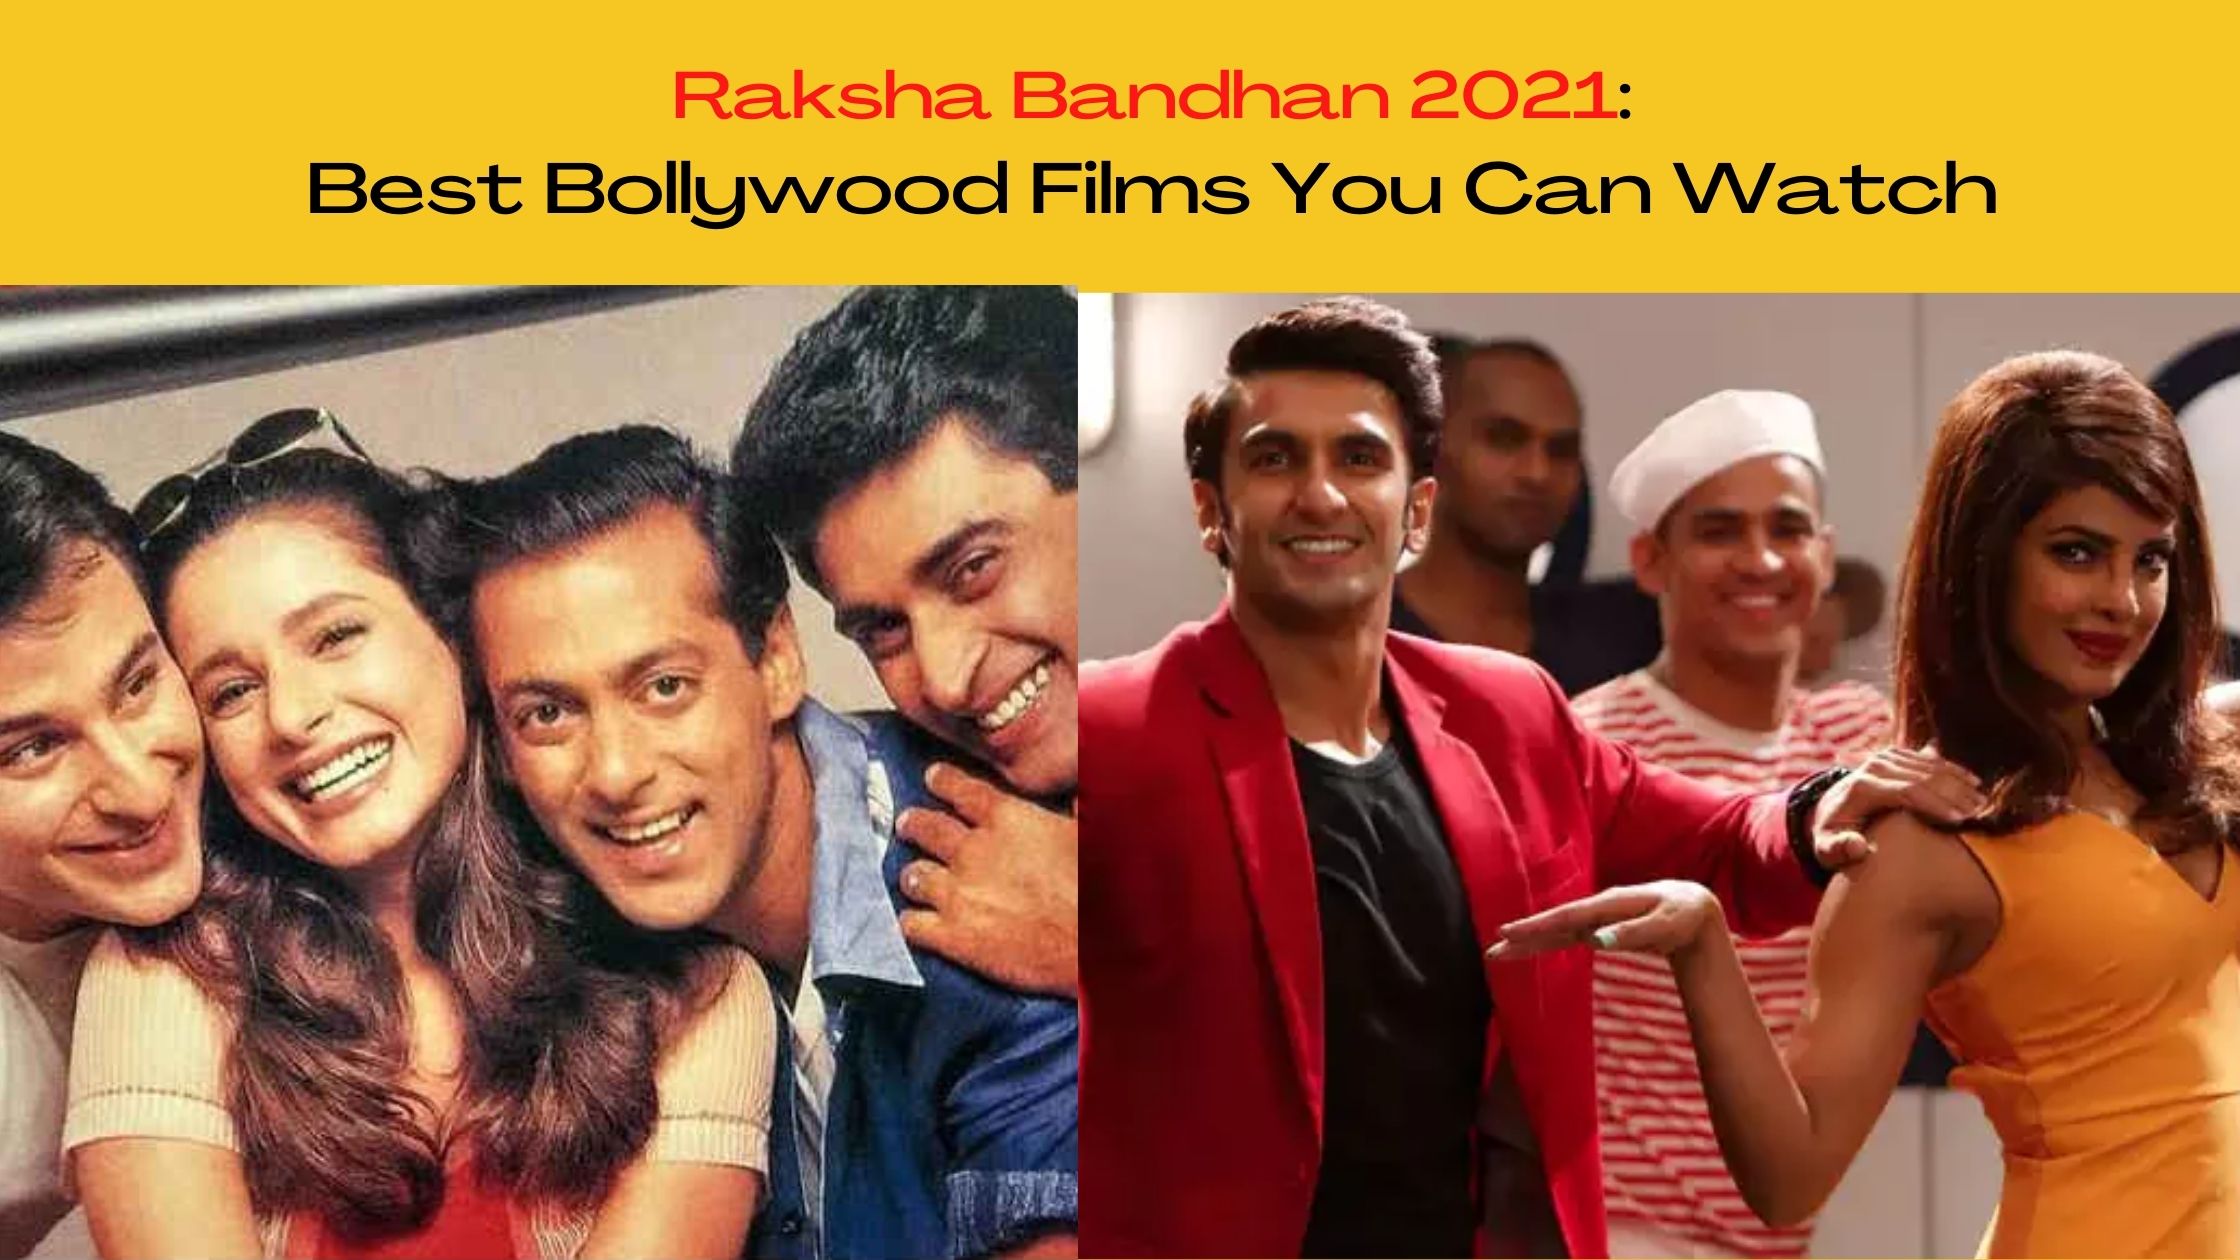 Raksha Bandhan 2021: Best Bollywood Films You Can Watch With Your Beloved Siblings